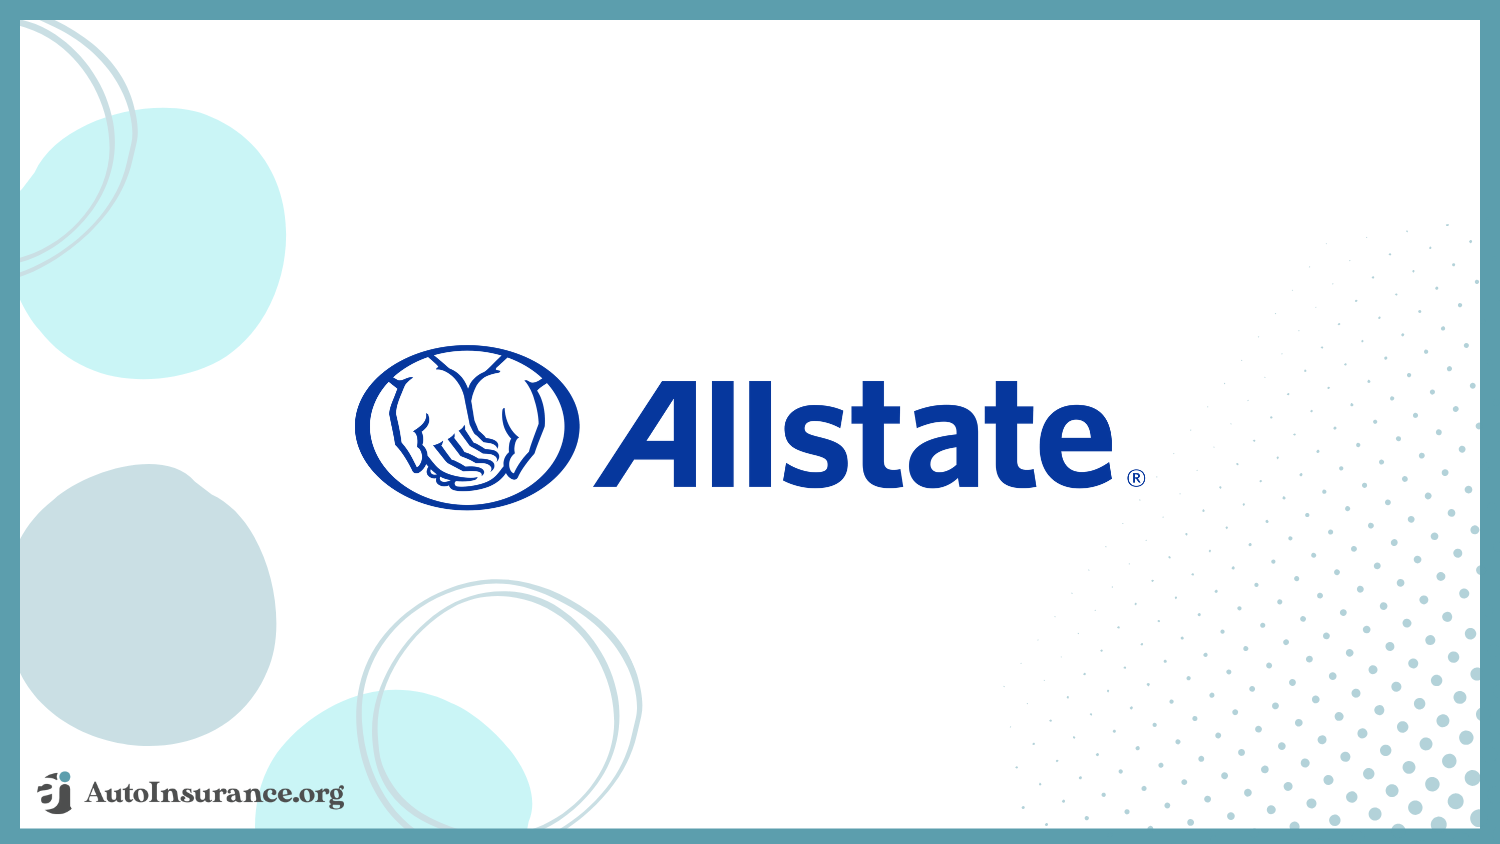 Allstate: Best Auto Insurance for Military Families and Veterans